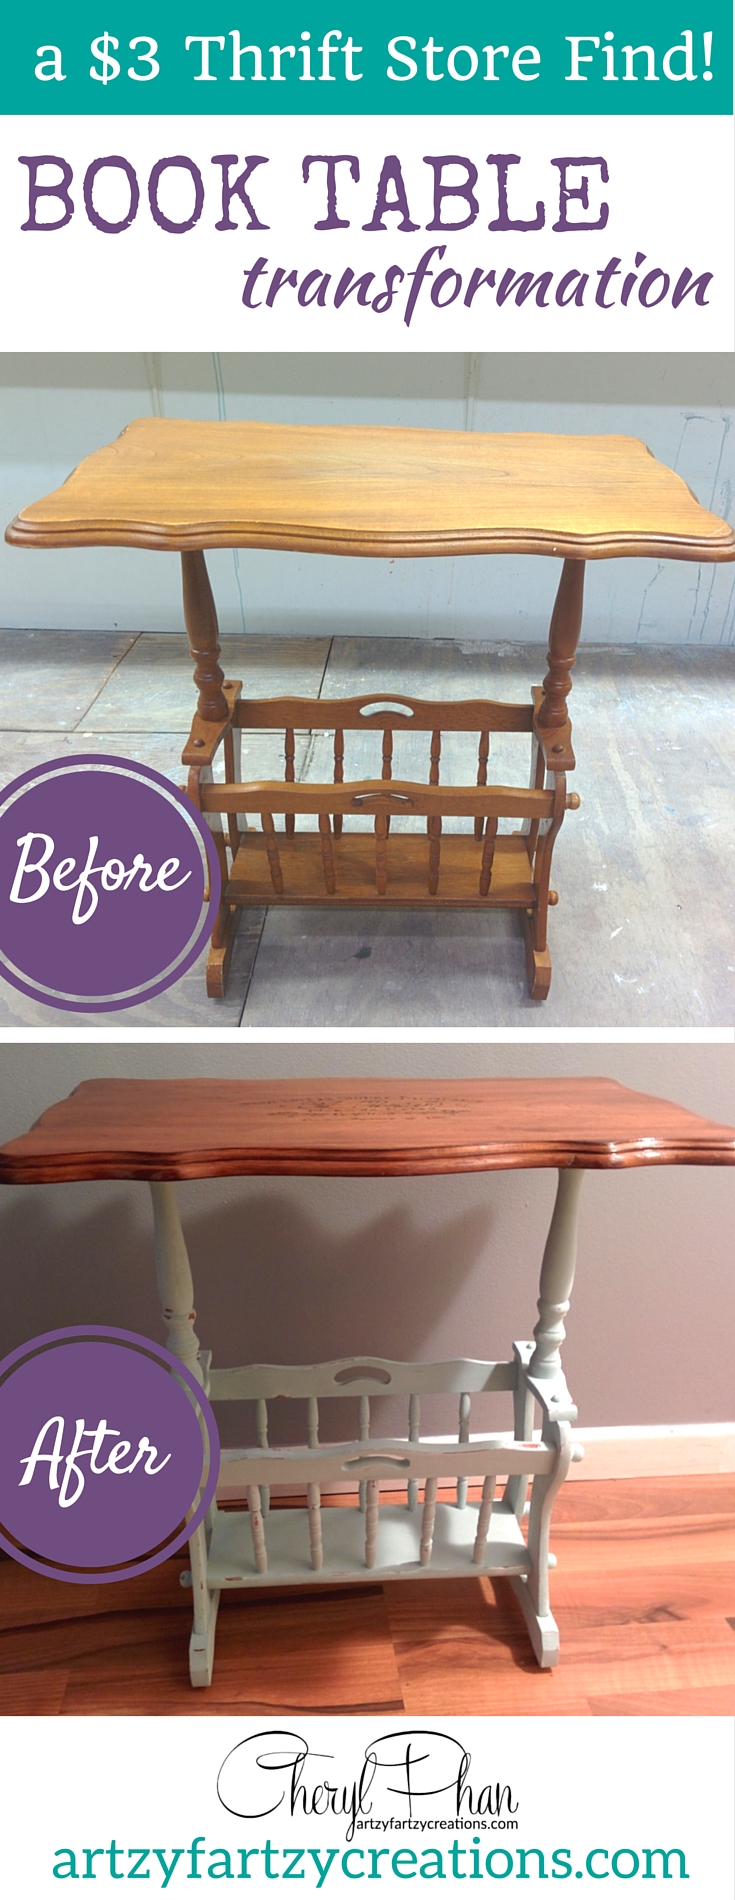 Pin it: $3 Thrift Store Furniture Makeover